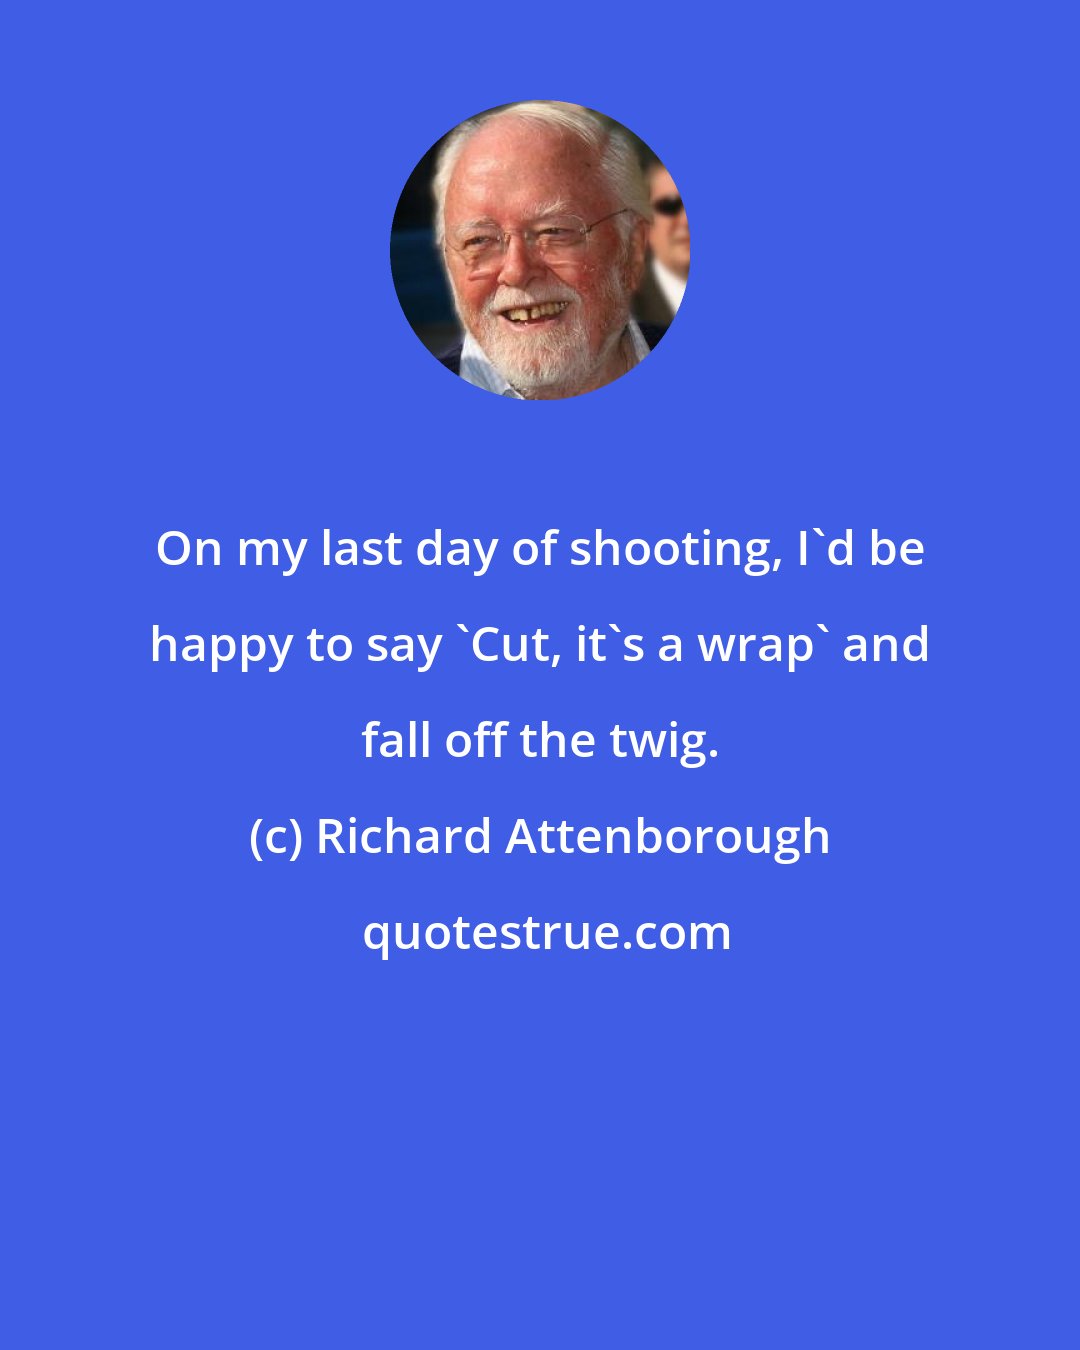 Richard Attenborough: On my last day of shooting, I'd be happy to say 'Cut, it's a wrap' and fall off the twig.